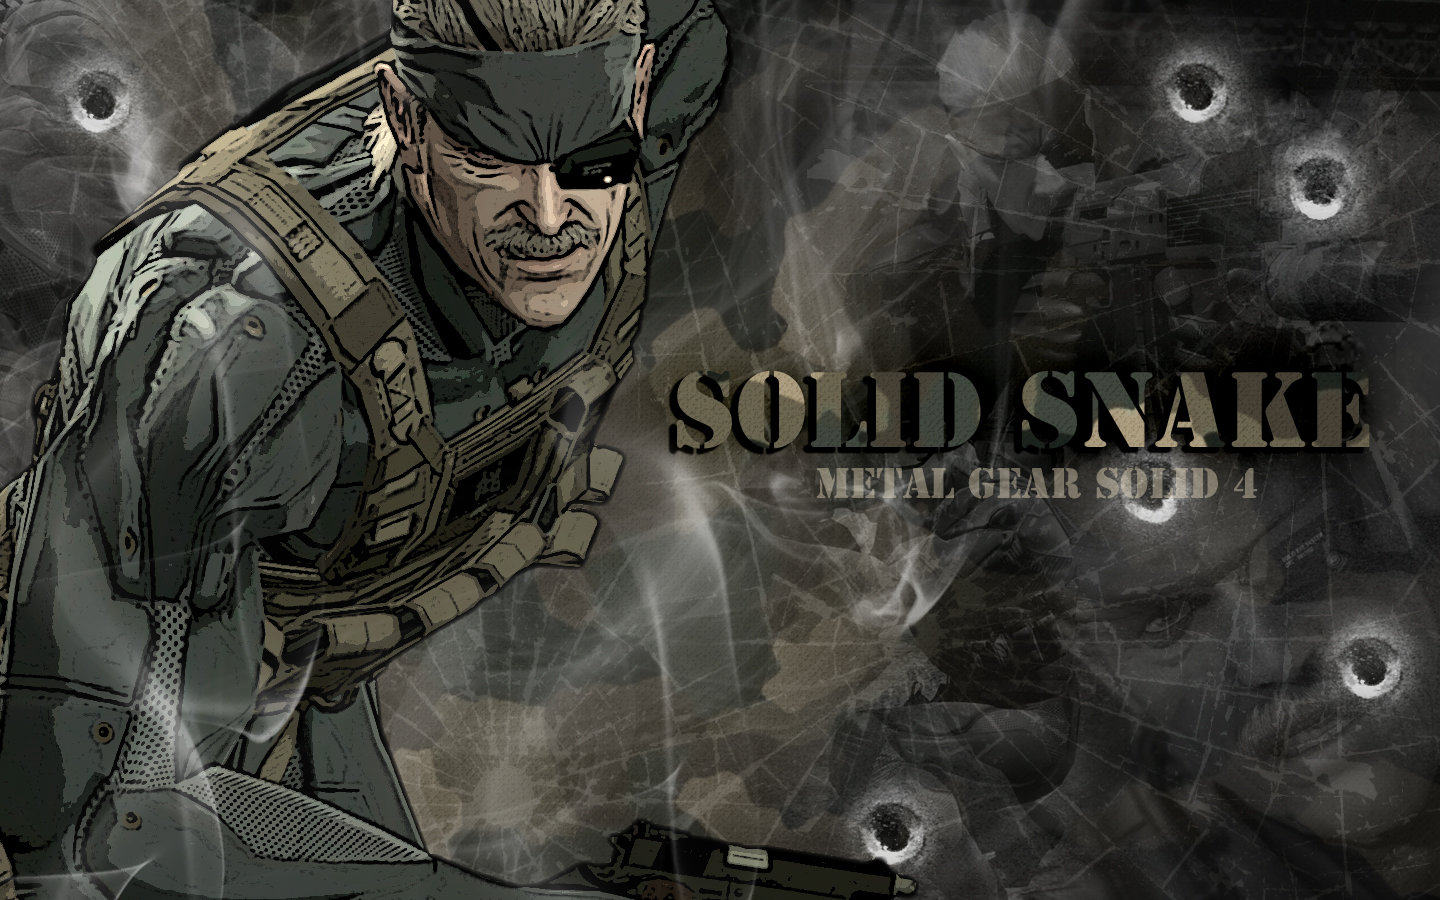 Solid Snake Mgs4 Wallpaper By Hallucination Walker On